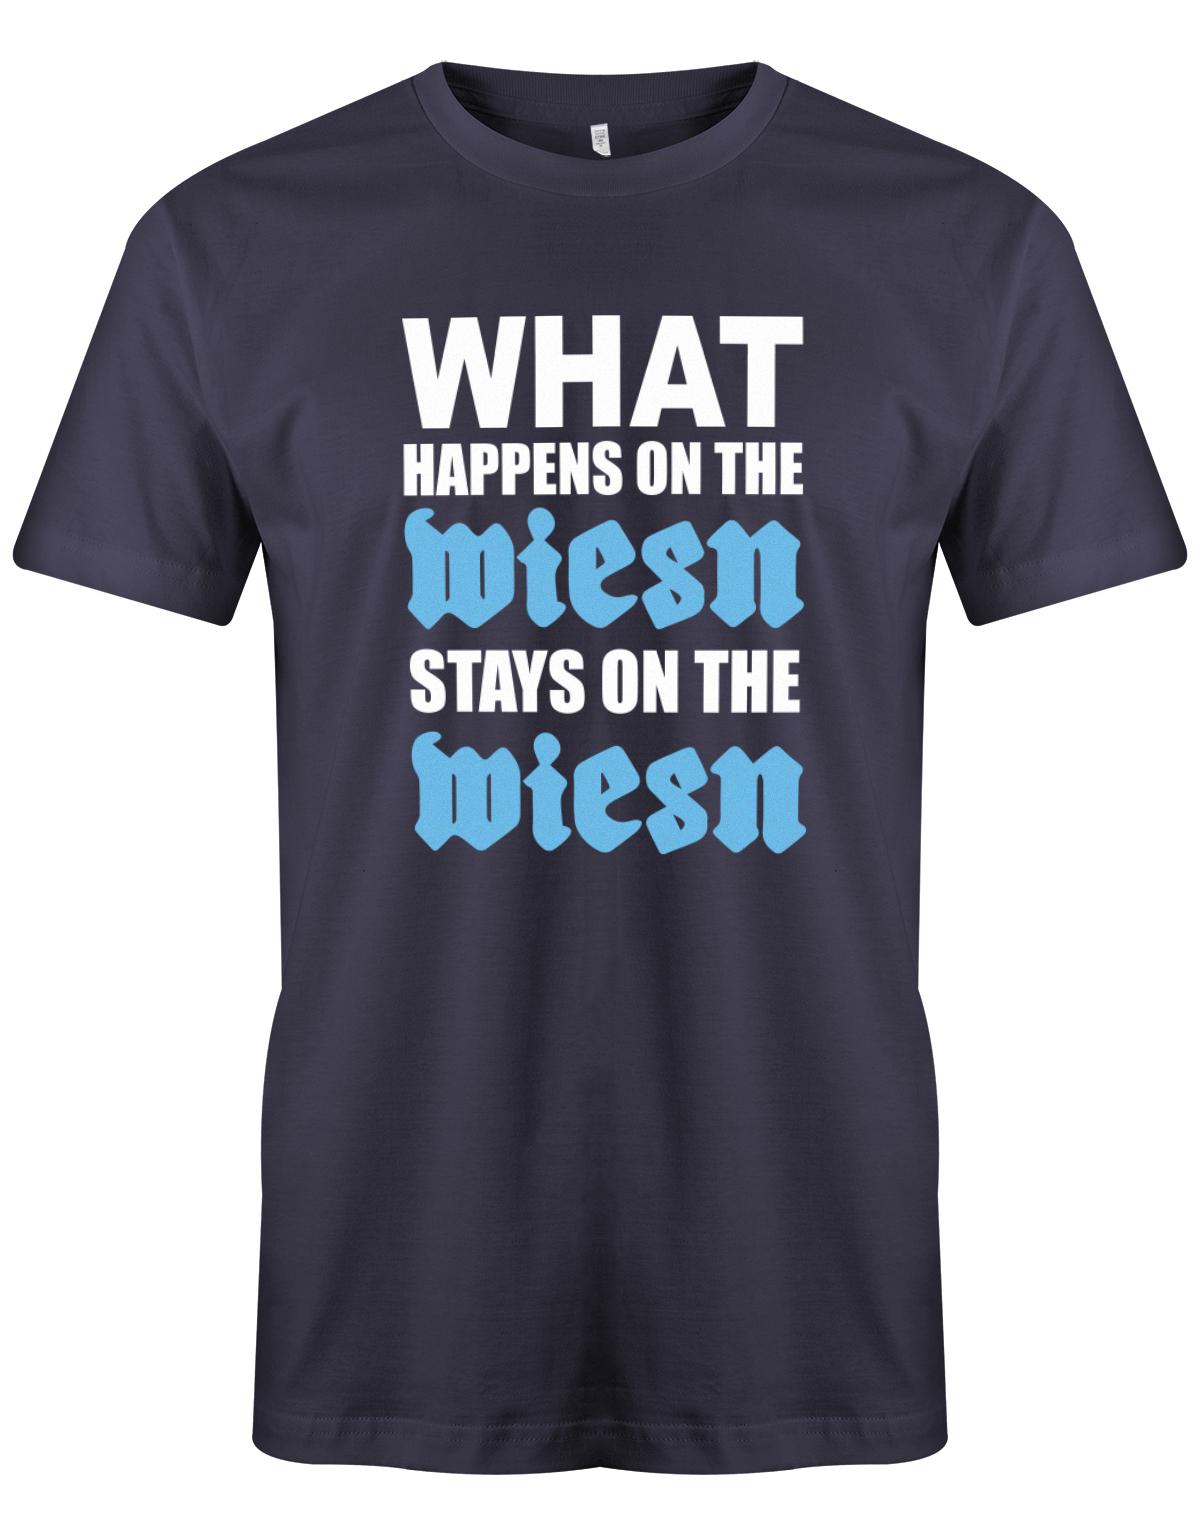 What-happens-on-the-wiesn-stay-on-the-wiesn-herren-shirt-Navy